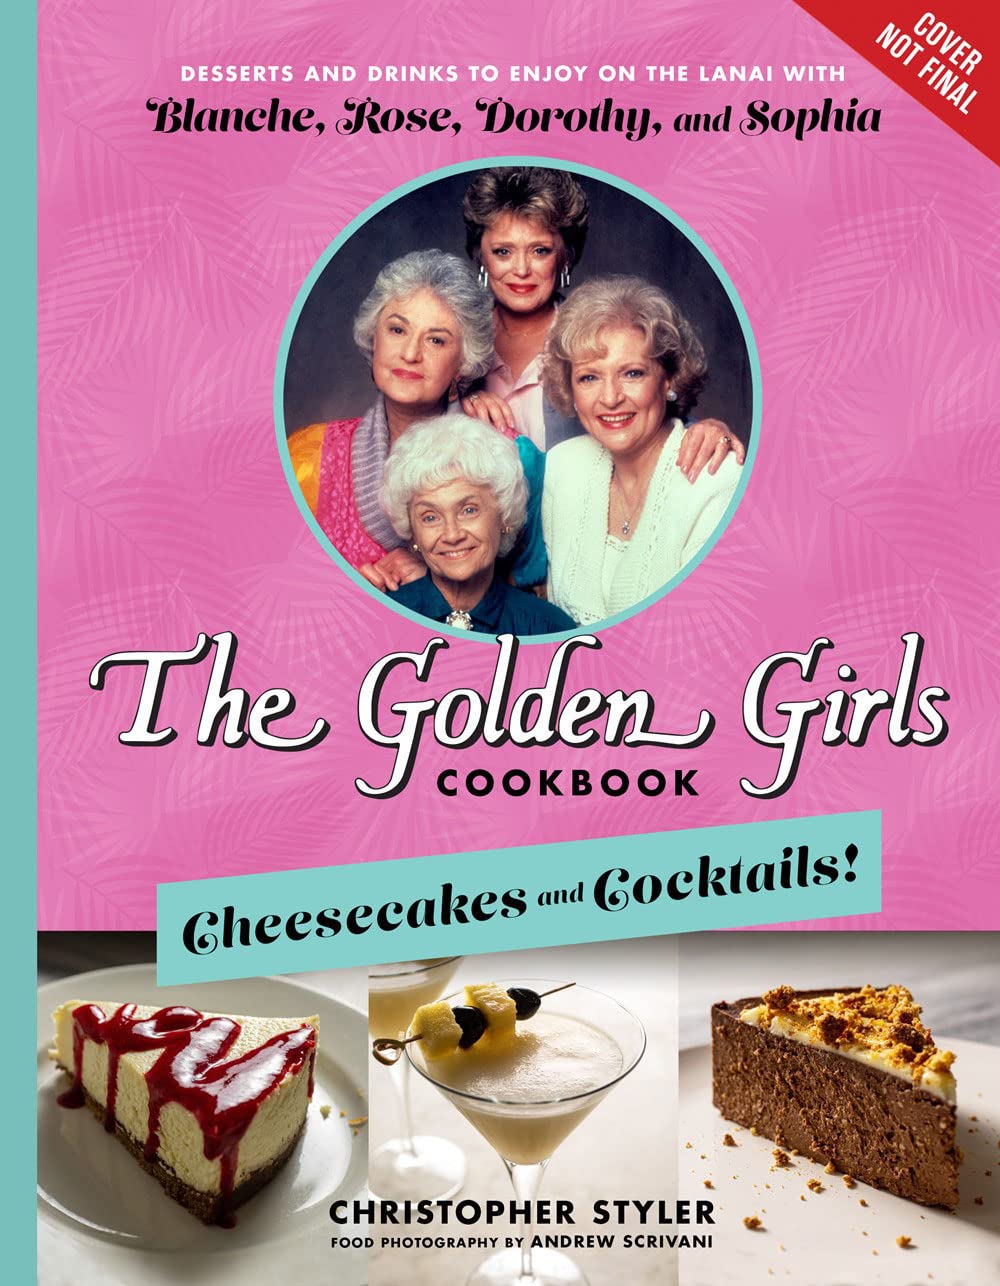 The Golden Girls Cookbook: Cheesecakes and Cocktails!: Desserts and Drinks to Enjoy on the Lanai with Blanche, Rose, Dorothy, and Sophia | Christopher Styler